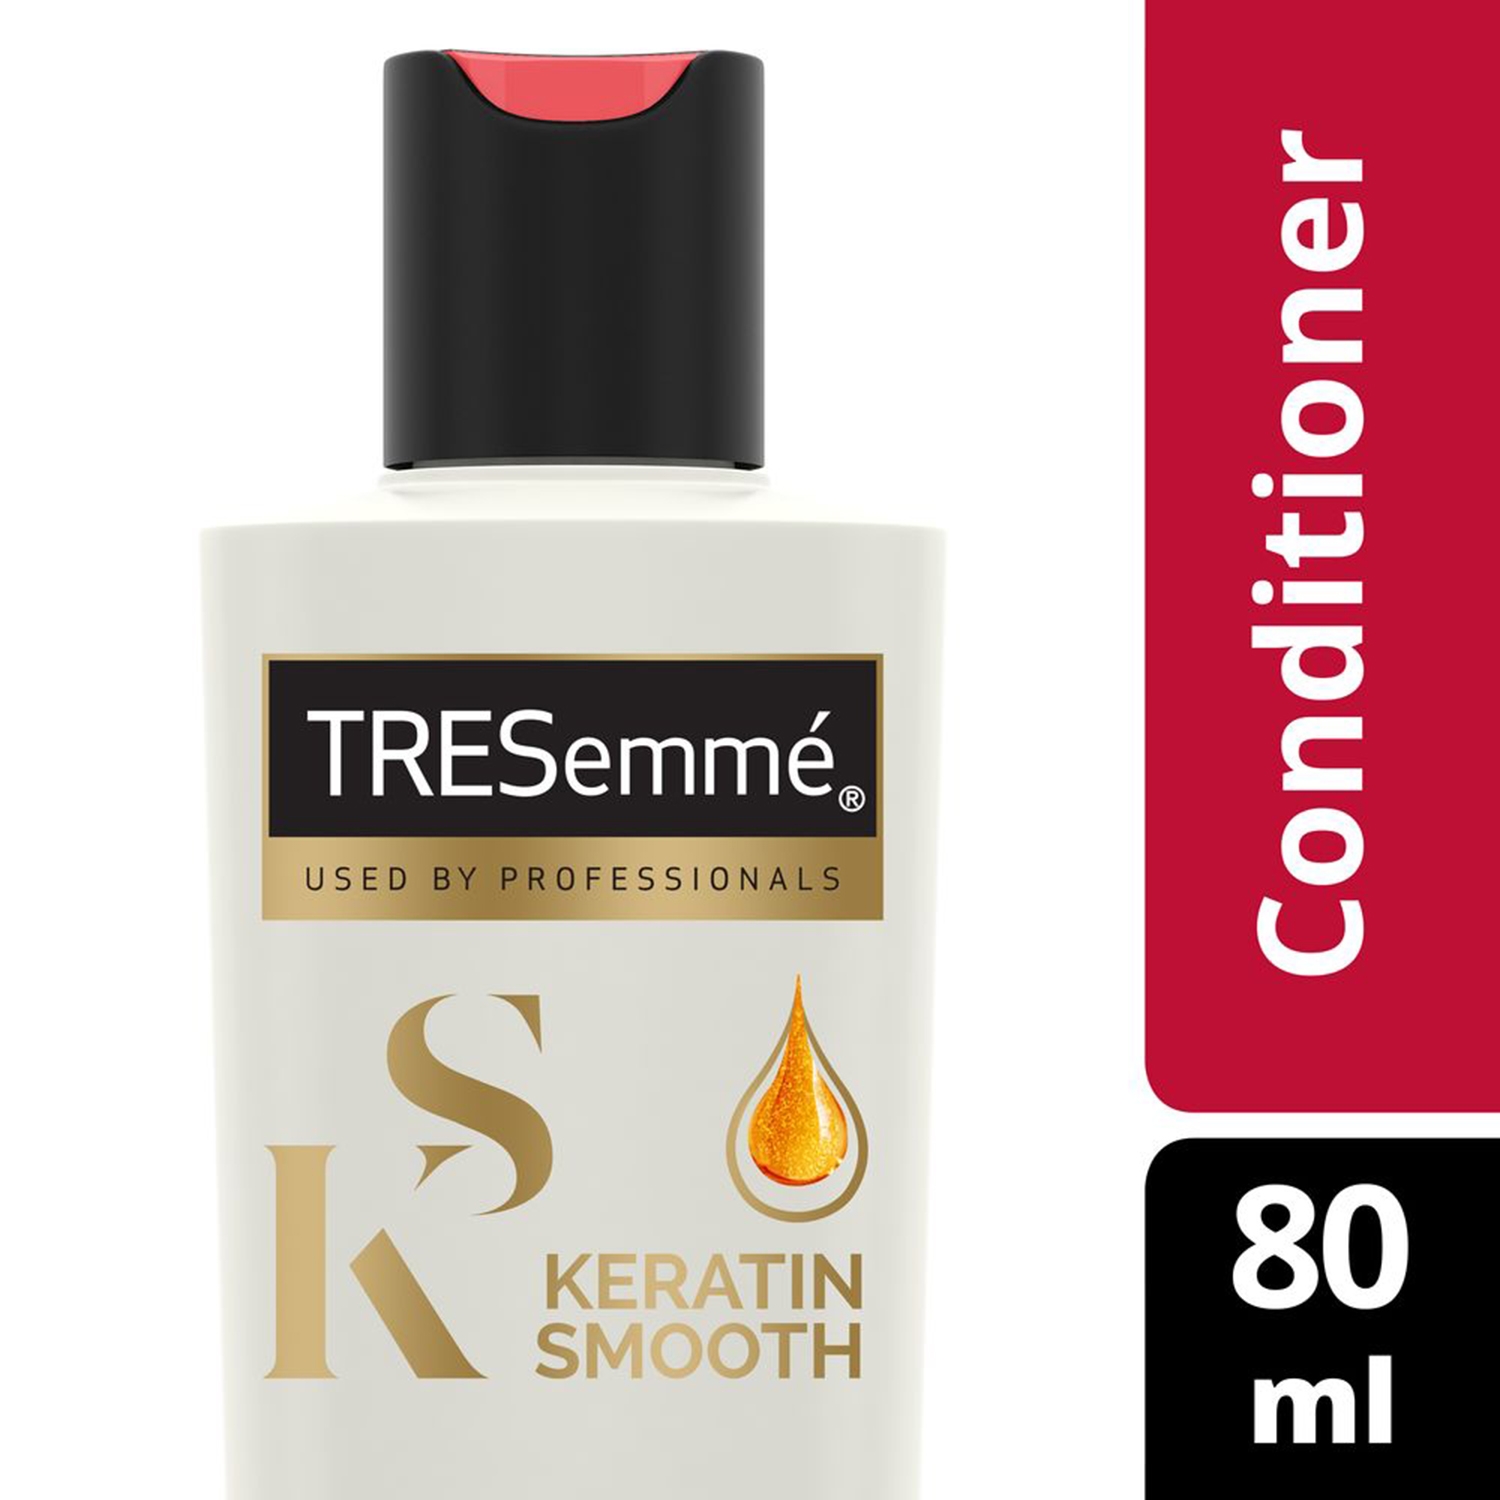 Tresemme | Tresemme Keratin Smooth Conditioner - (80ml)